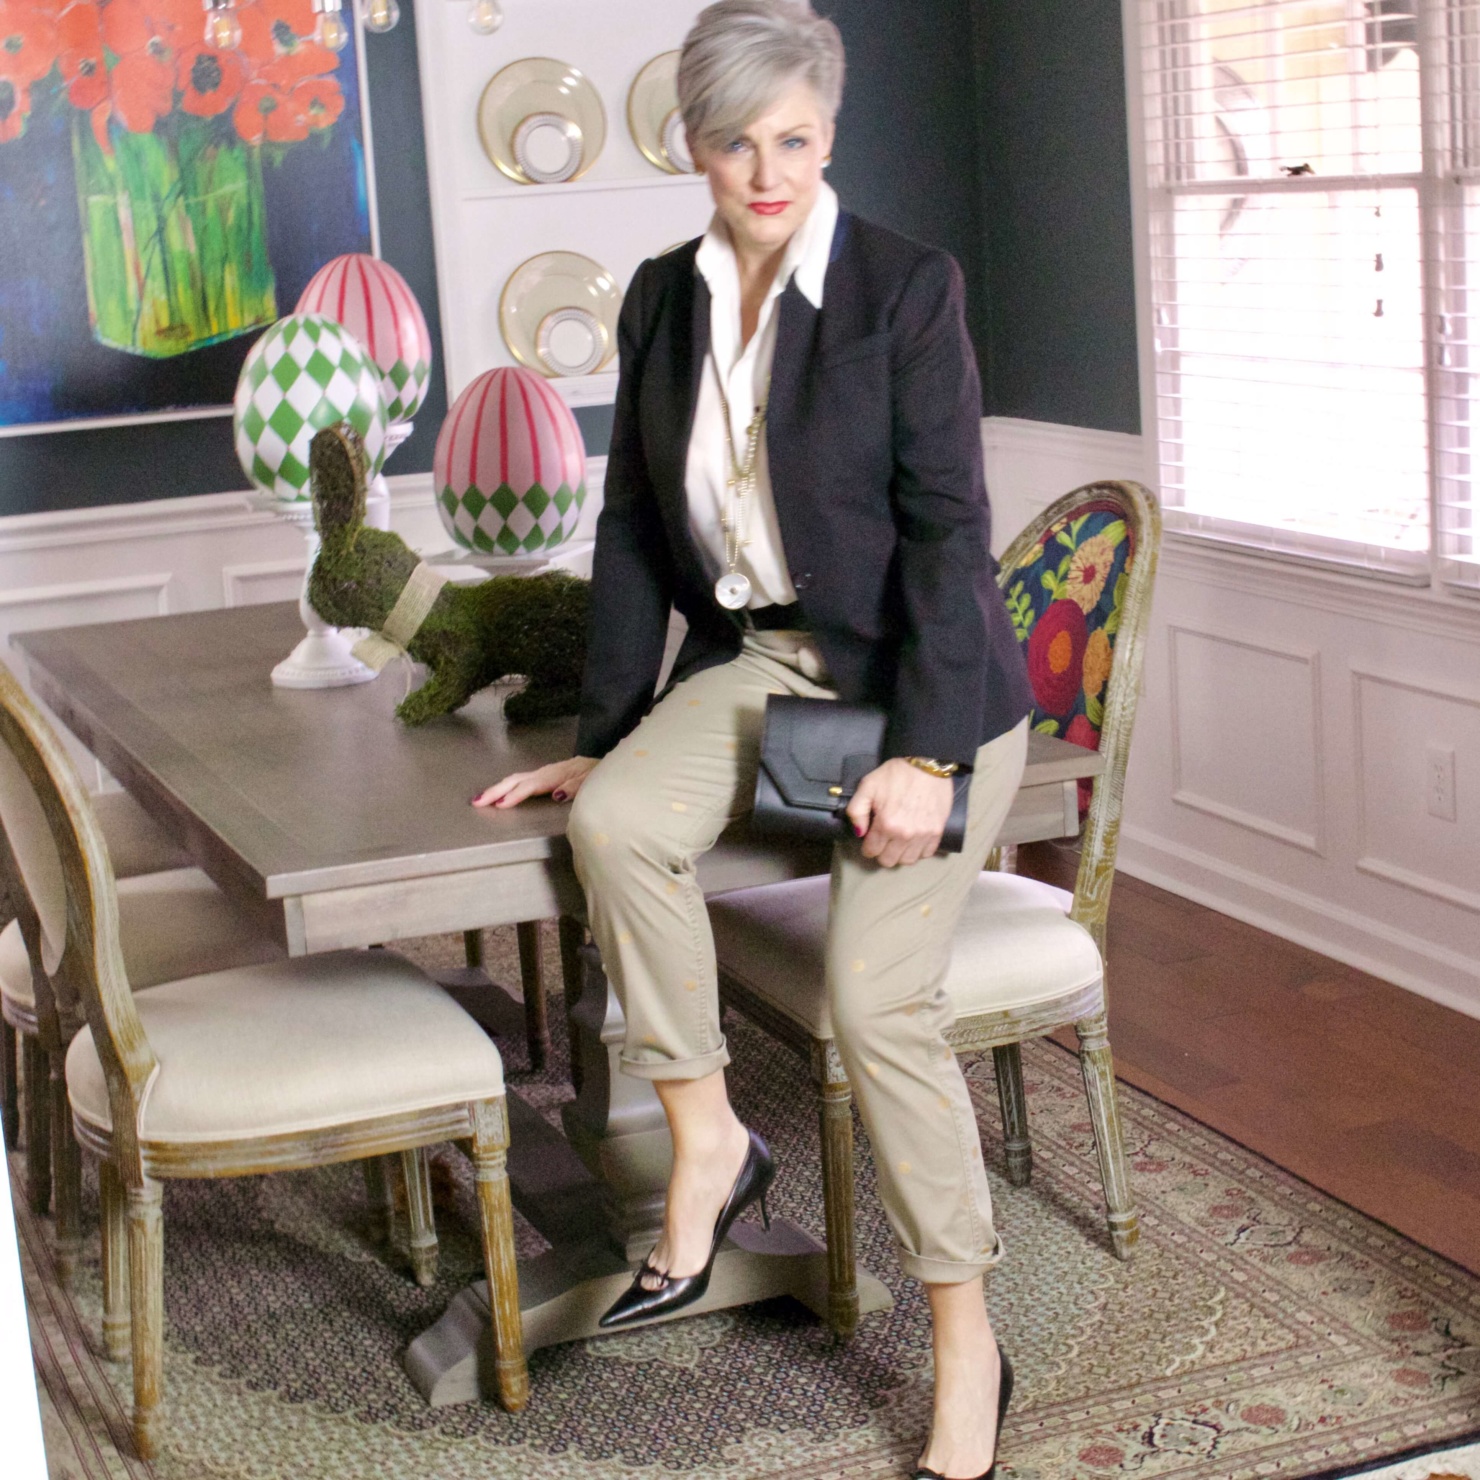 beth from Style at a Certain Age wears J.Crew chinos, black blazer, ivory silk blouse, black pumps and black clutch handbag